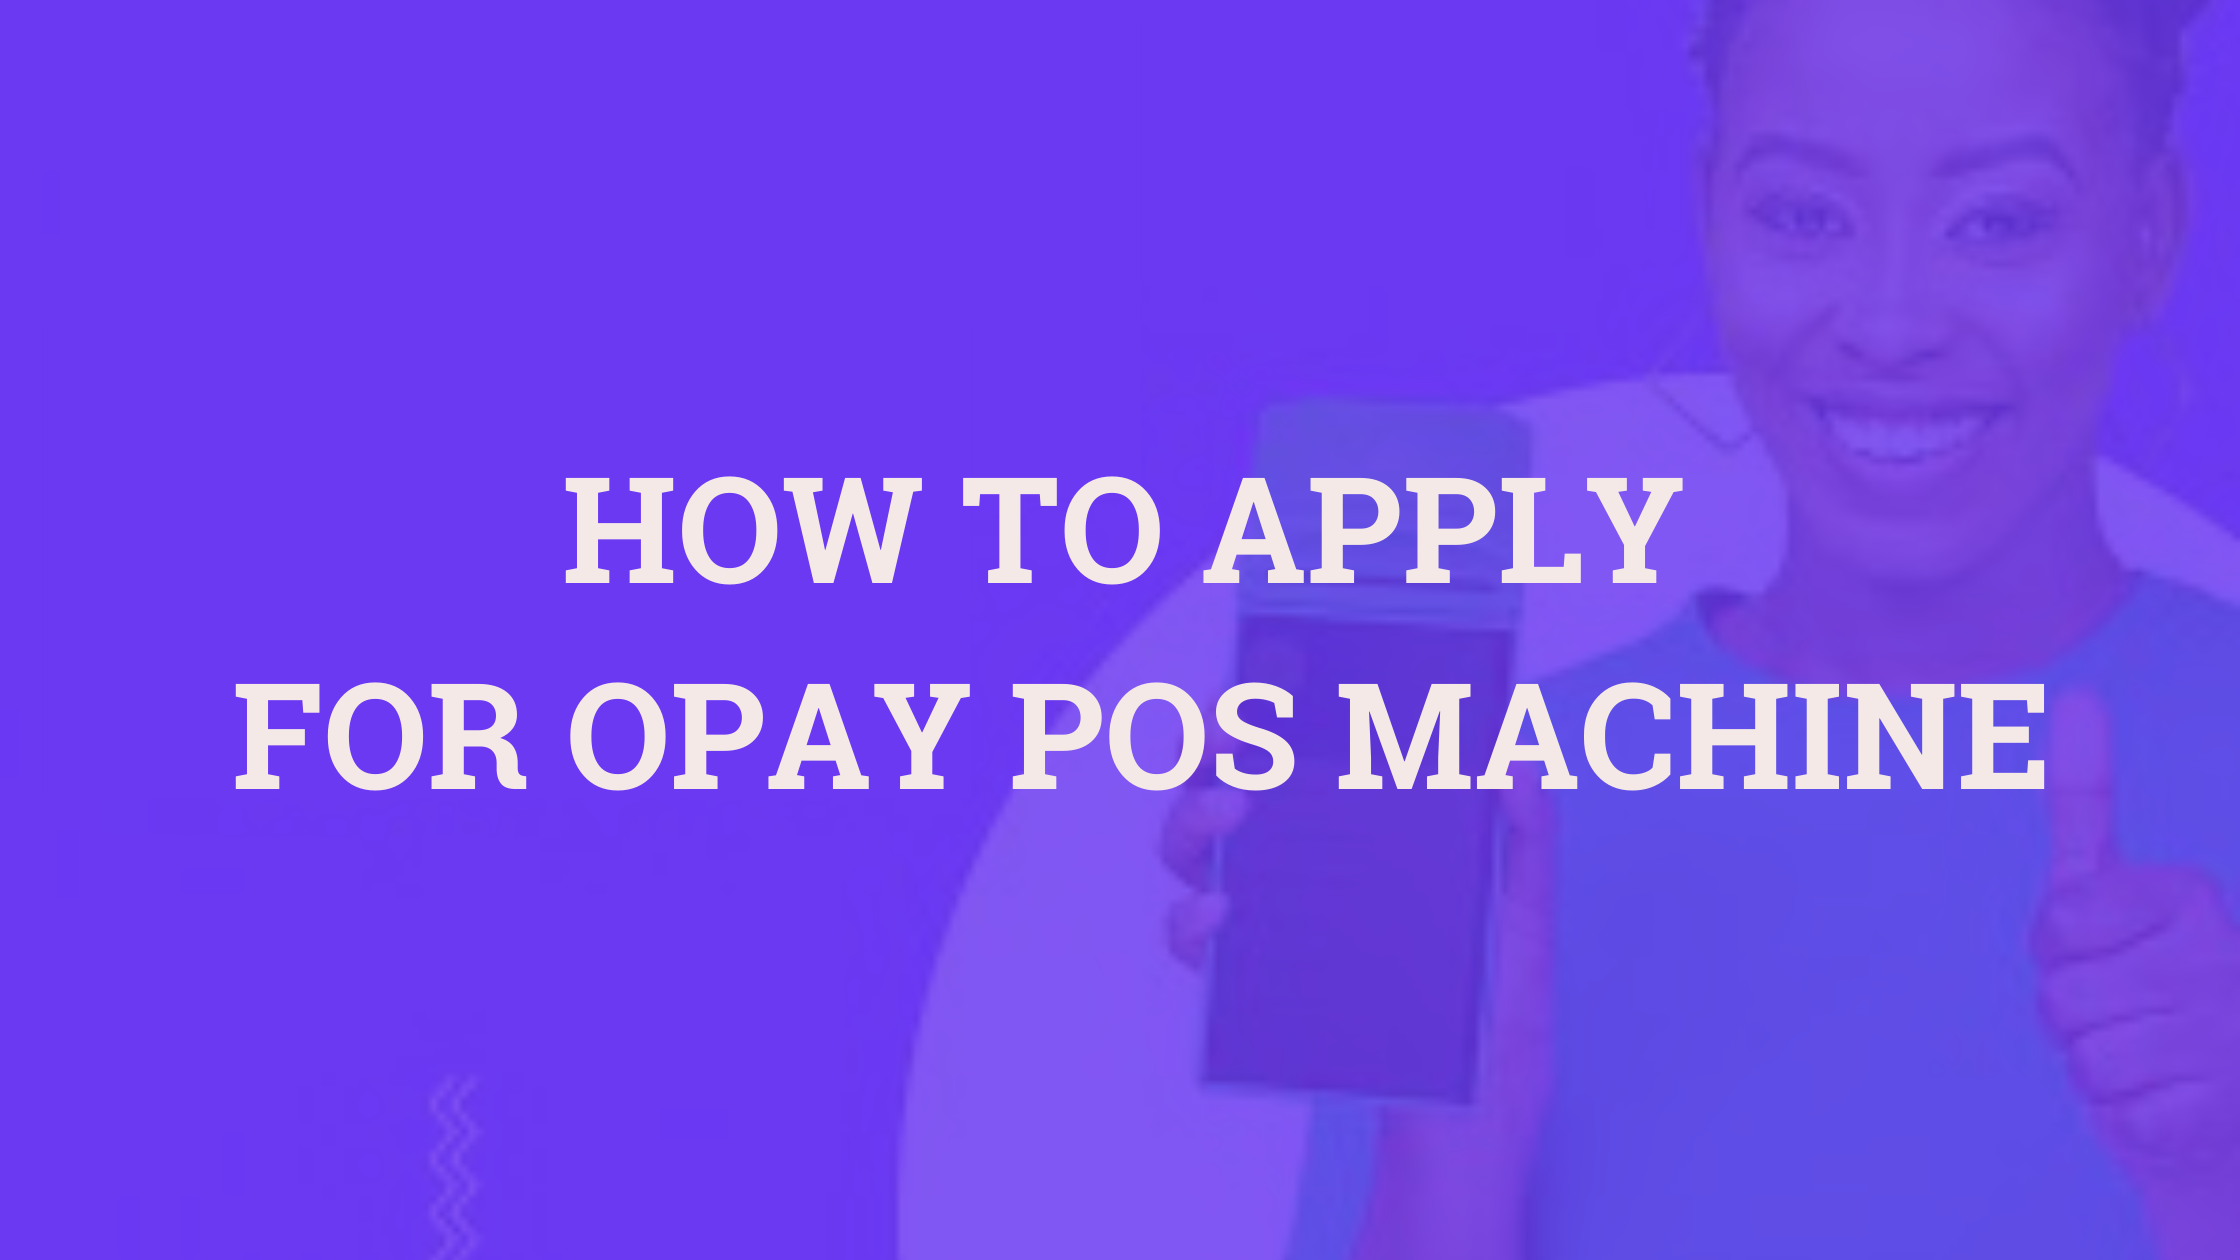 How to apply for Opay POS machine